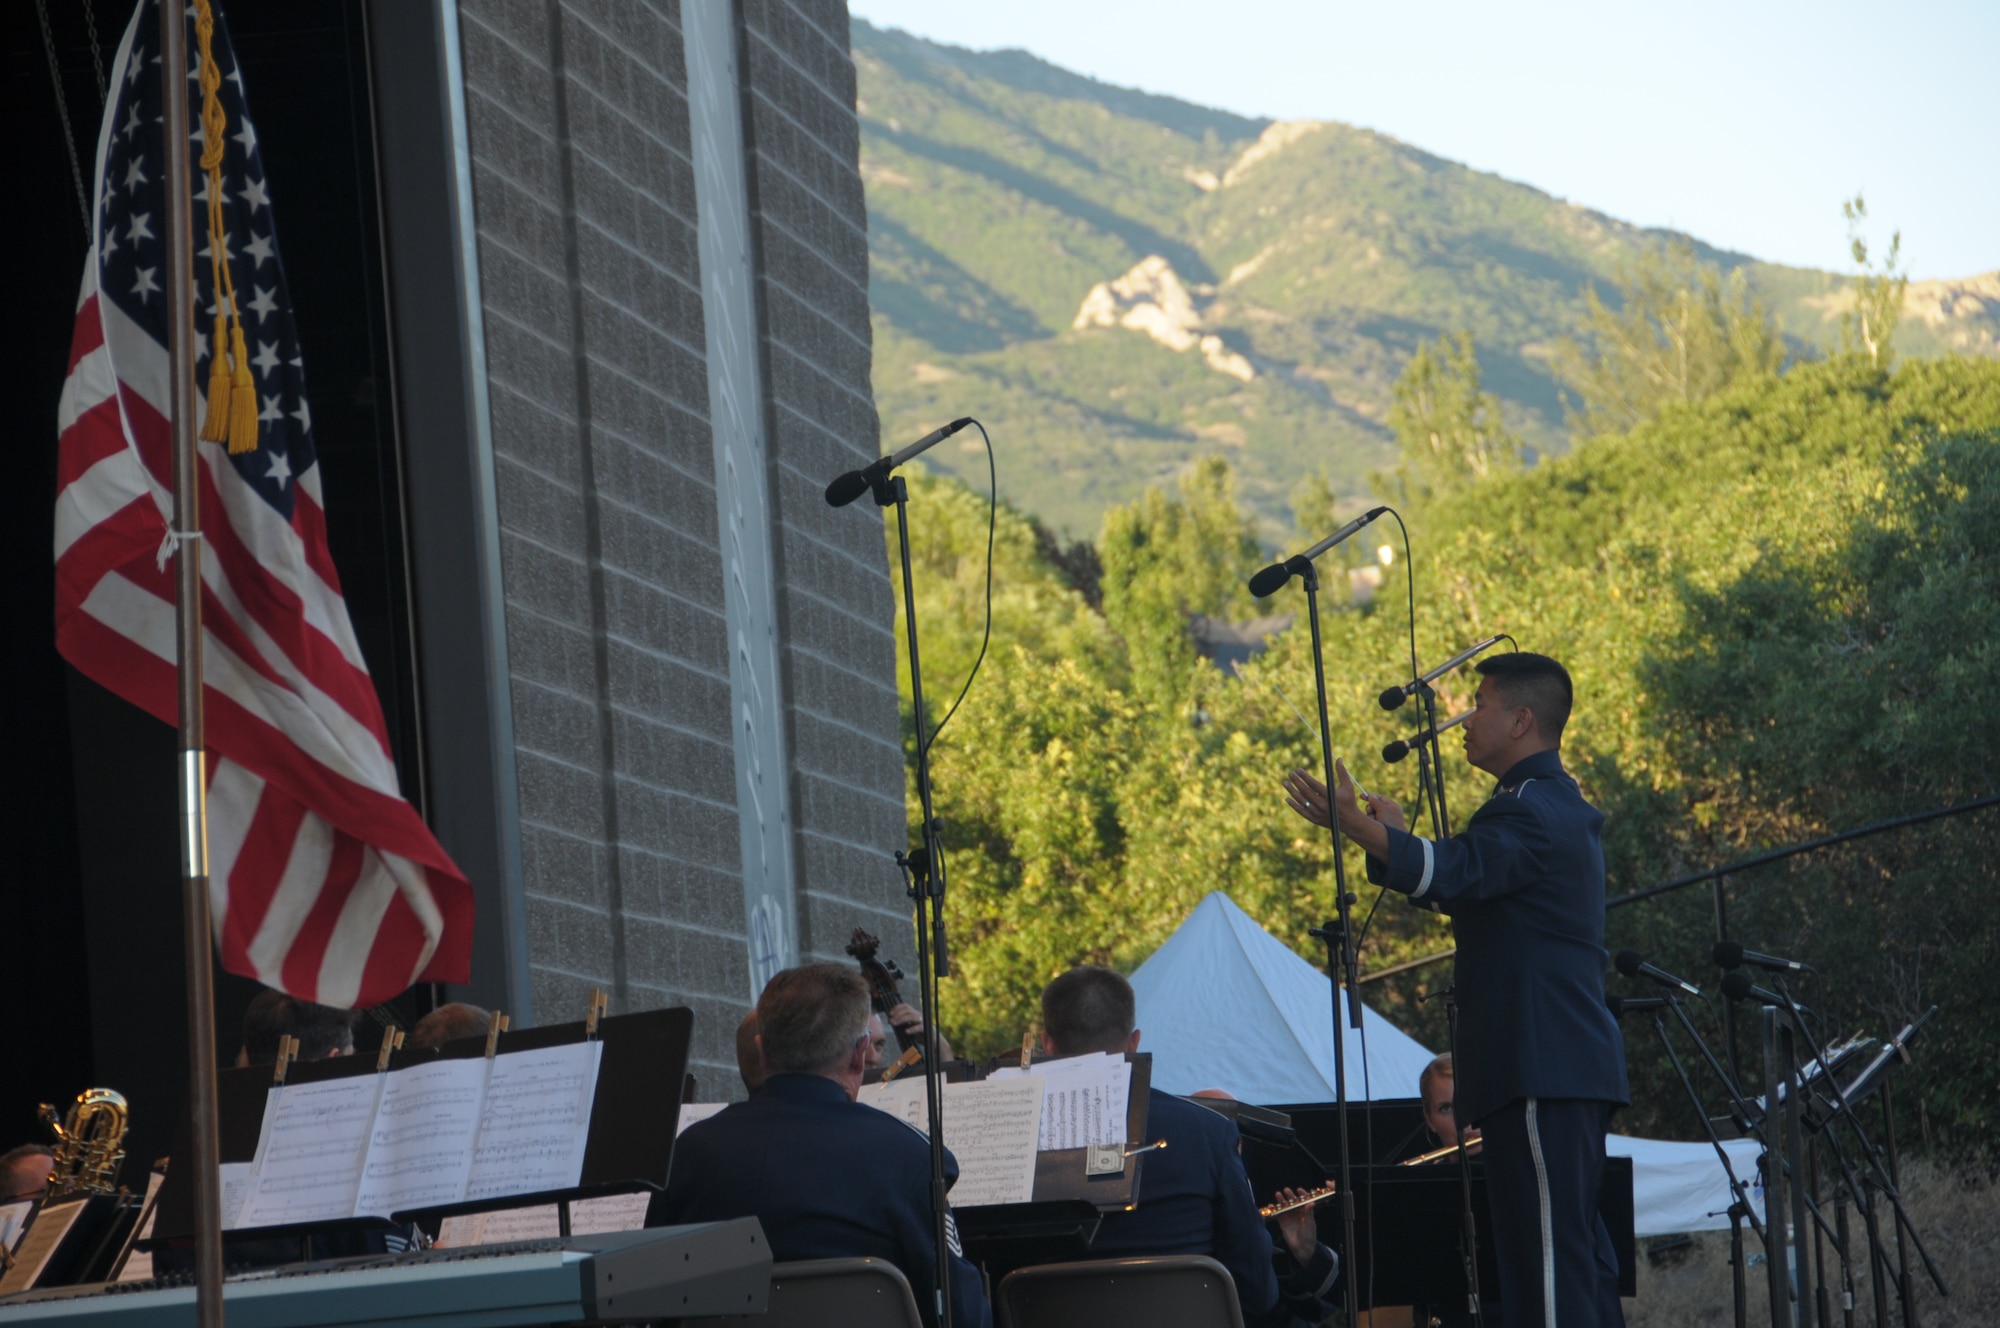 U.S. Air Force Capt. Vu Nguyen, commander of the 562nd Air Force Band of the West Coast, conducts the band at a performance at the Draper City Amphitheater in Draper City, Utah on July 1, 2014. (U.S. Air National Guard photo by Airman 1st Class Madeleine Richards/Released)


